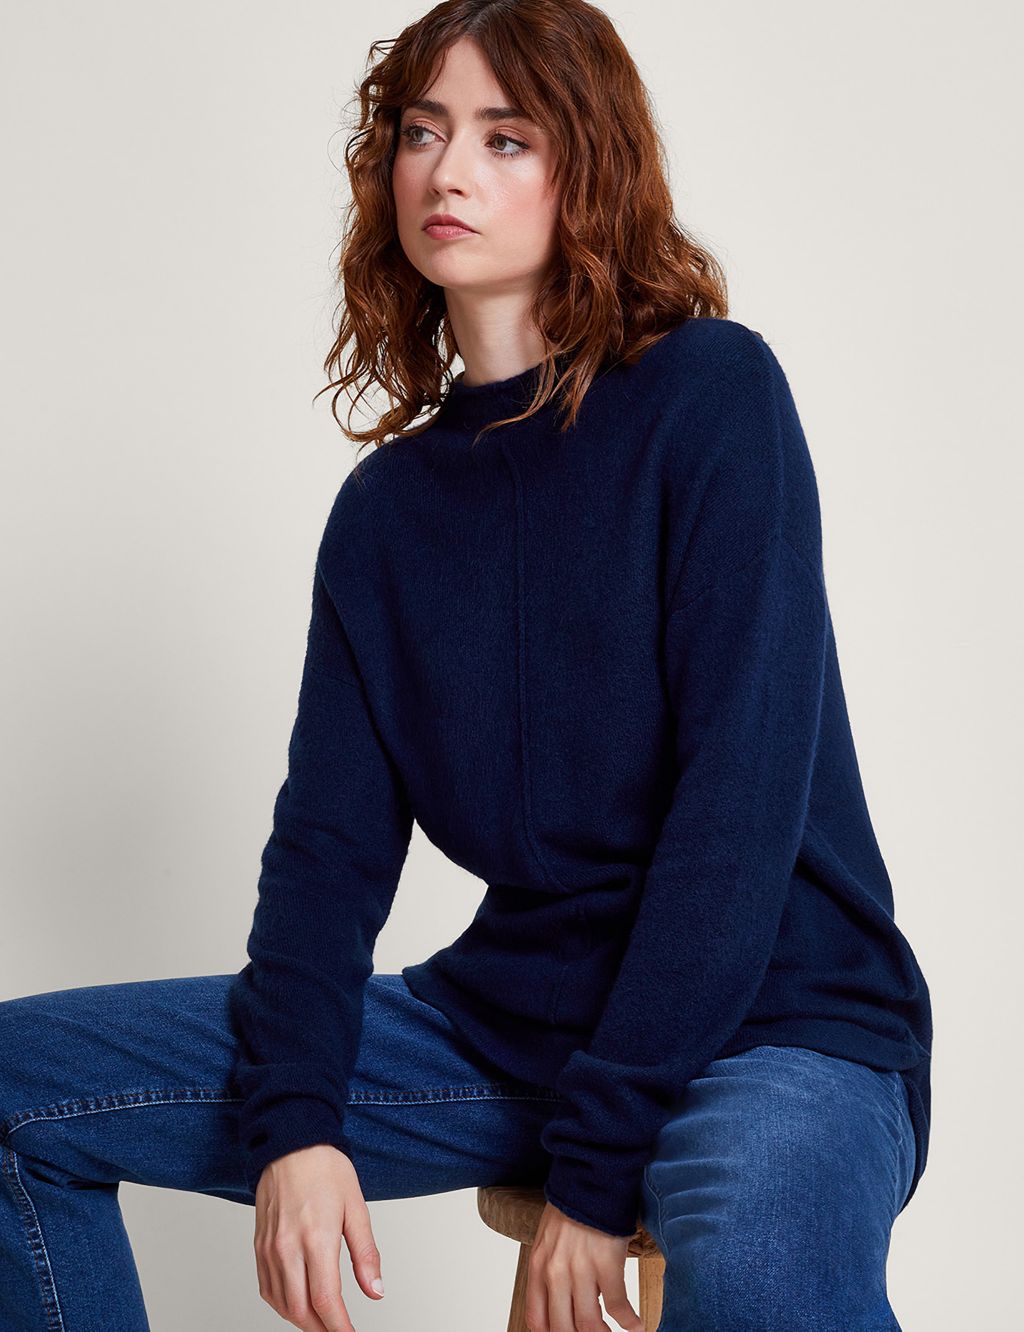 Crew Neck Longline Jumper with Wool image 1